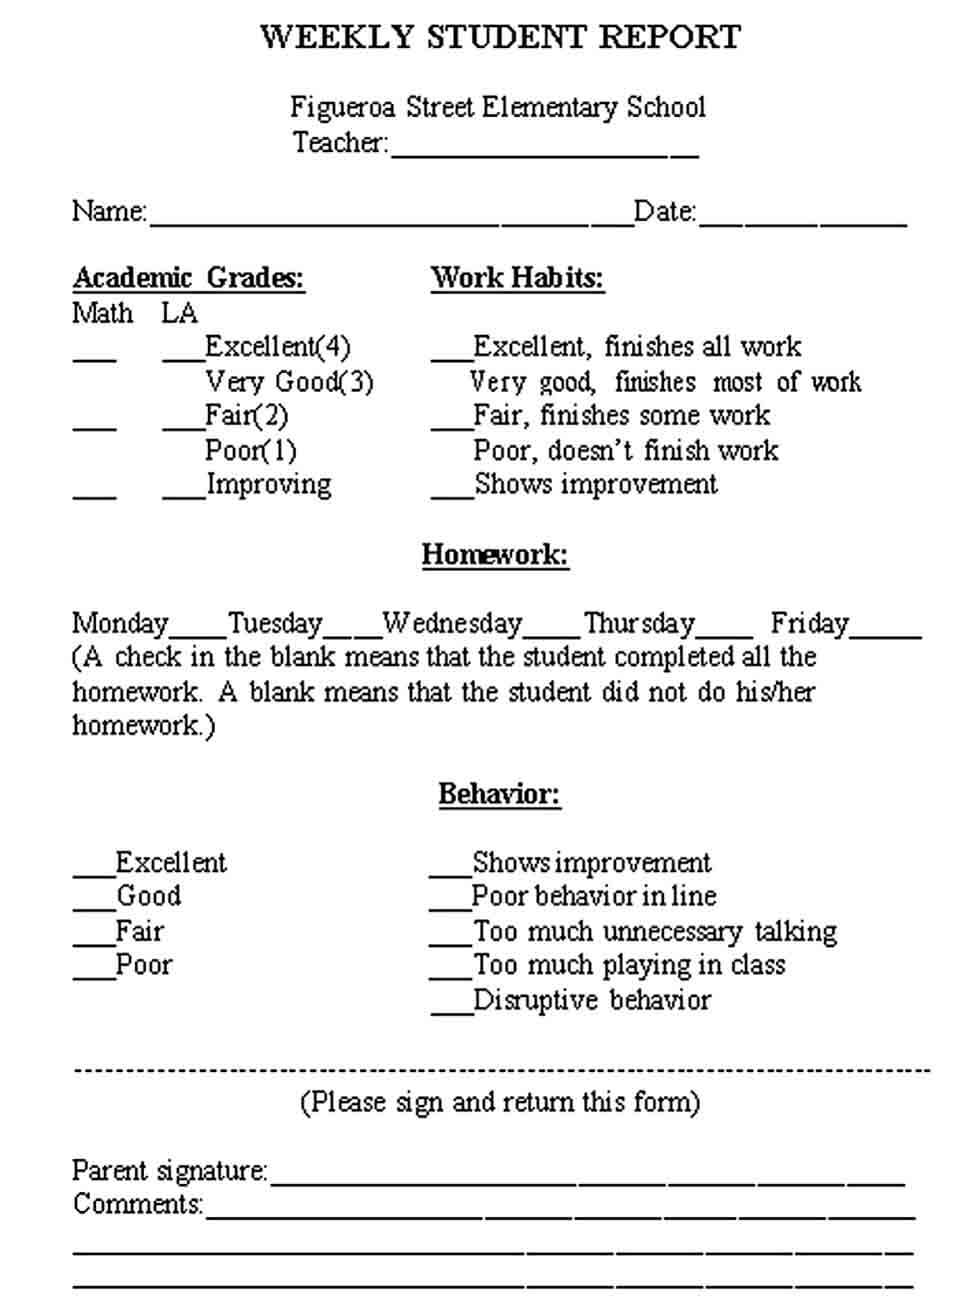 Student Weekly Report Form